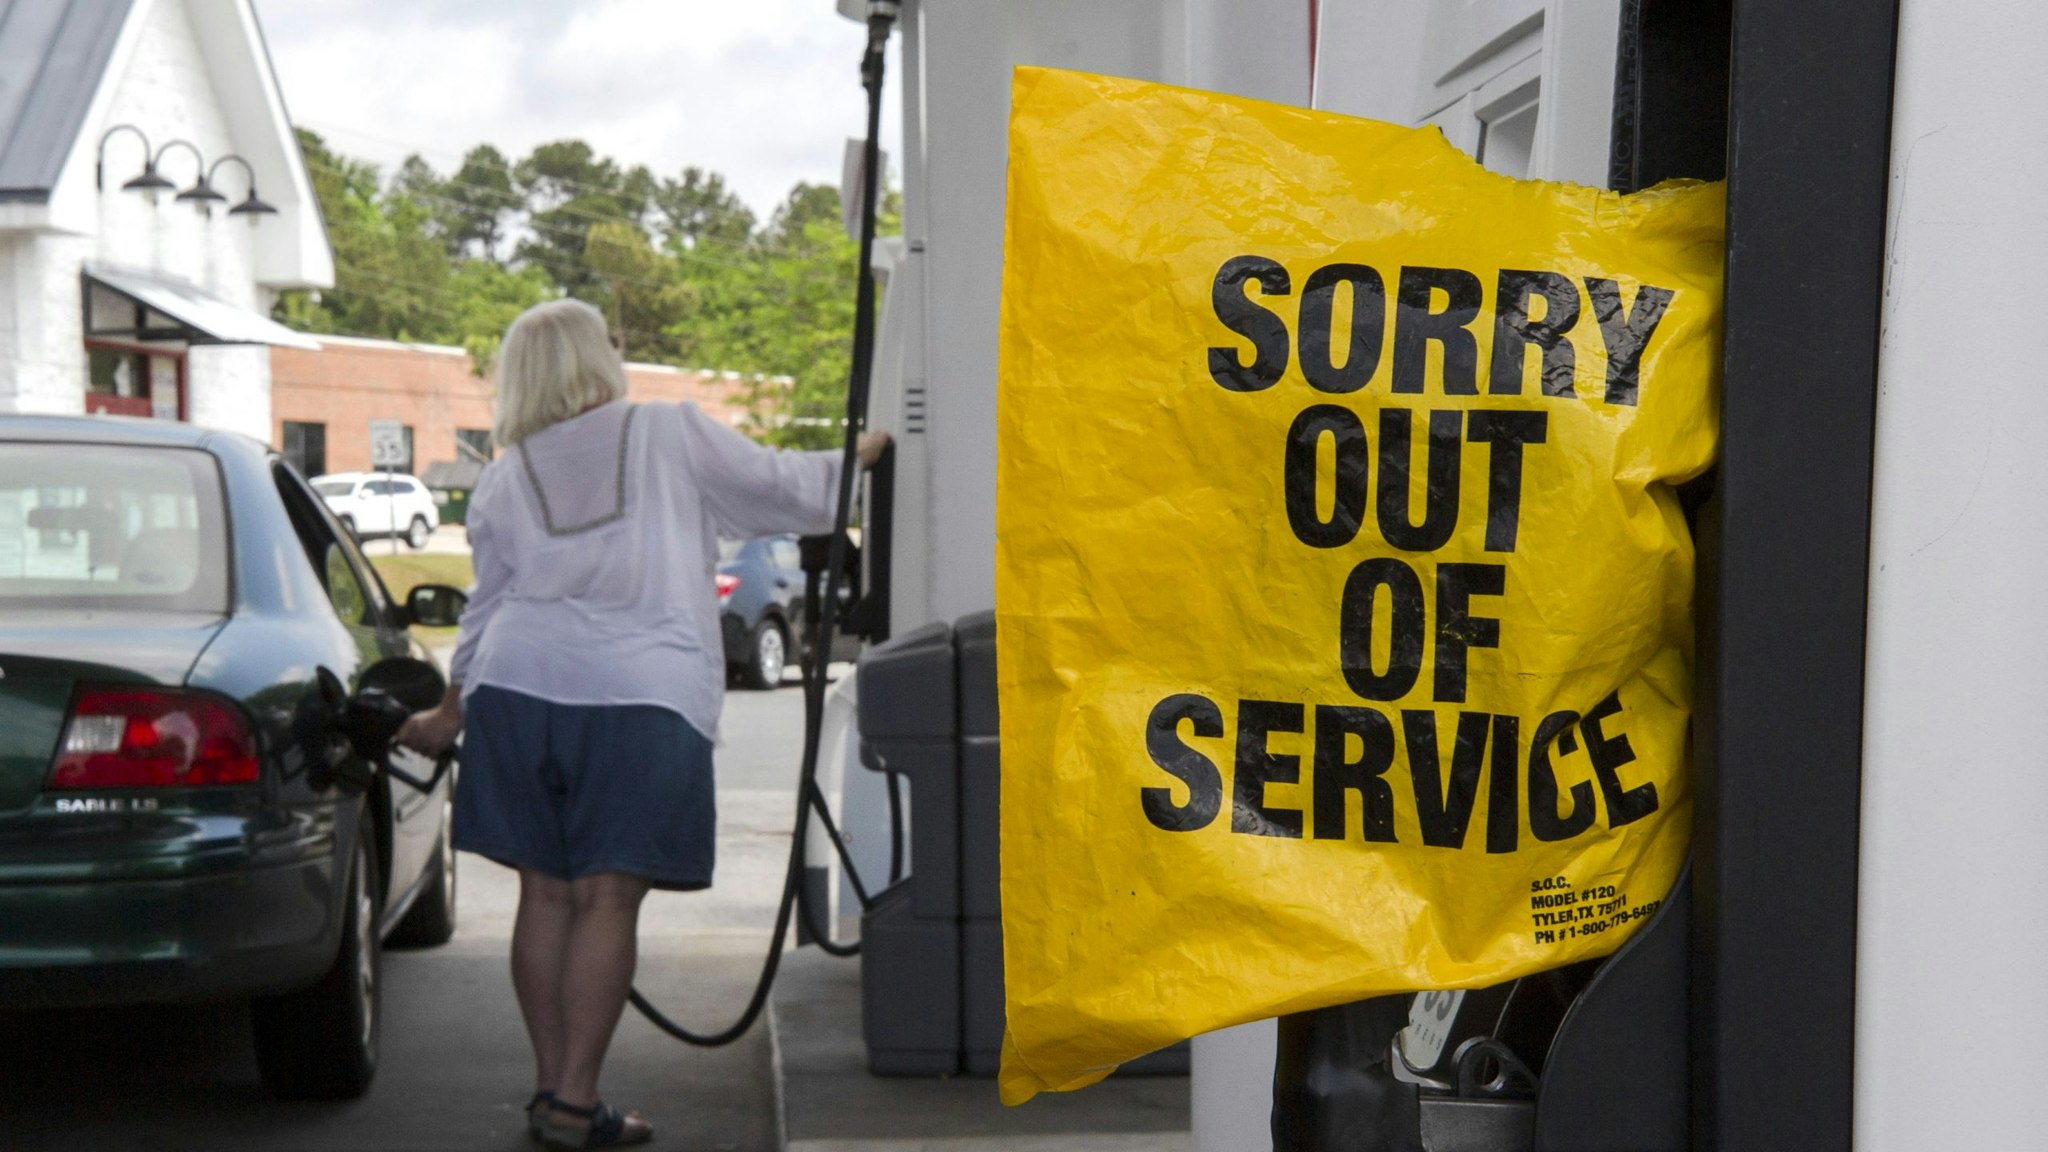 A "Sorry Out Of Service" bag covers a fuel pump at a Royal Dutch Shell gas station on Broad Street in Sumter, South Carolina, U.S., on Tuesday, May 11, 2021. Motorists across a broad swath of the U.S. East Coast and South are struggling to find gasoline and diesel as filling stations run dry amid the unprecedented pipeline disruption caused by a criminal hack.